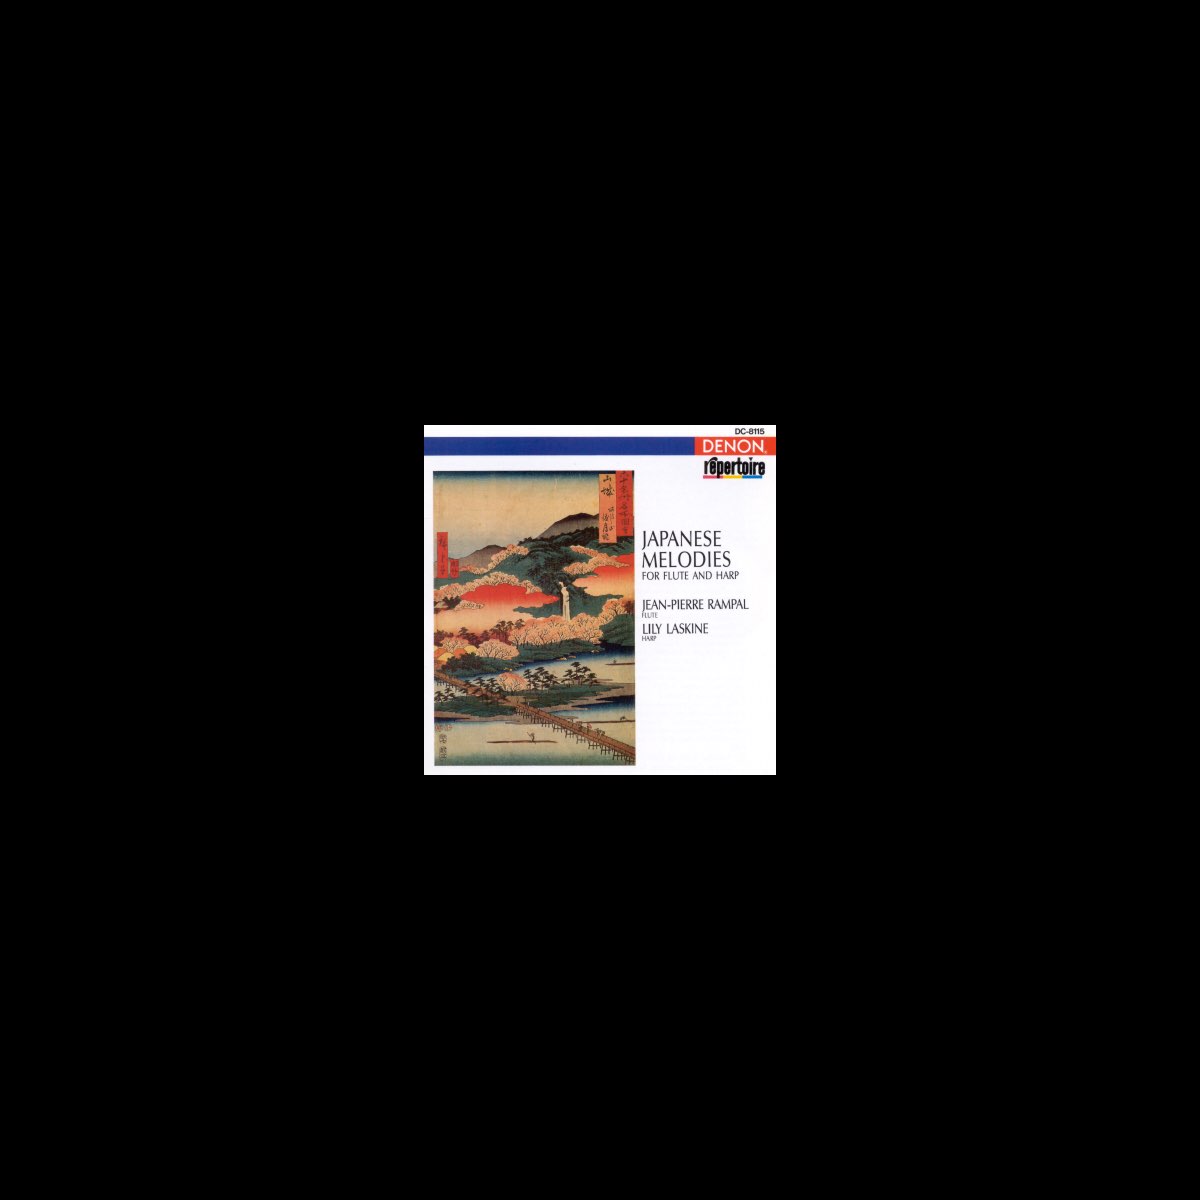 Japanese Melodies for Flute and Harp by Jean-Pierre Rampal & Lily Laskine  on Apple Music